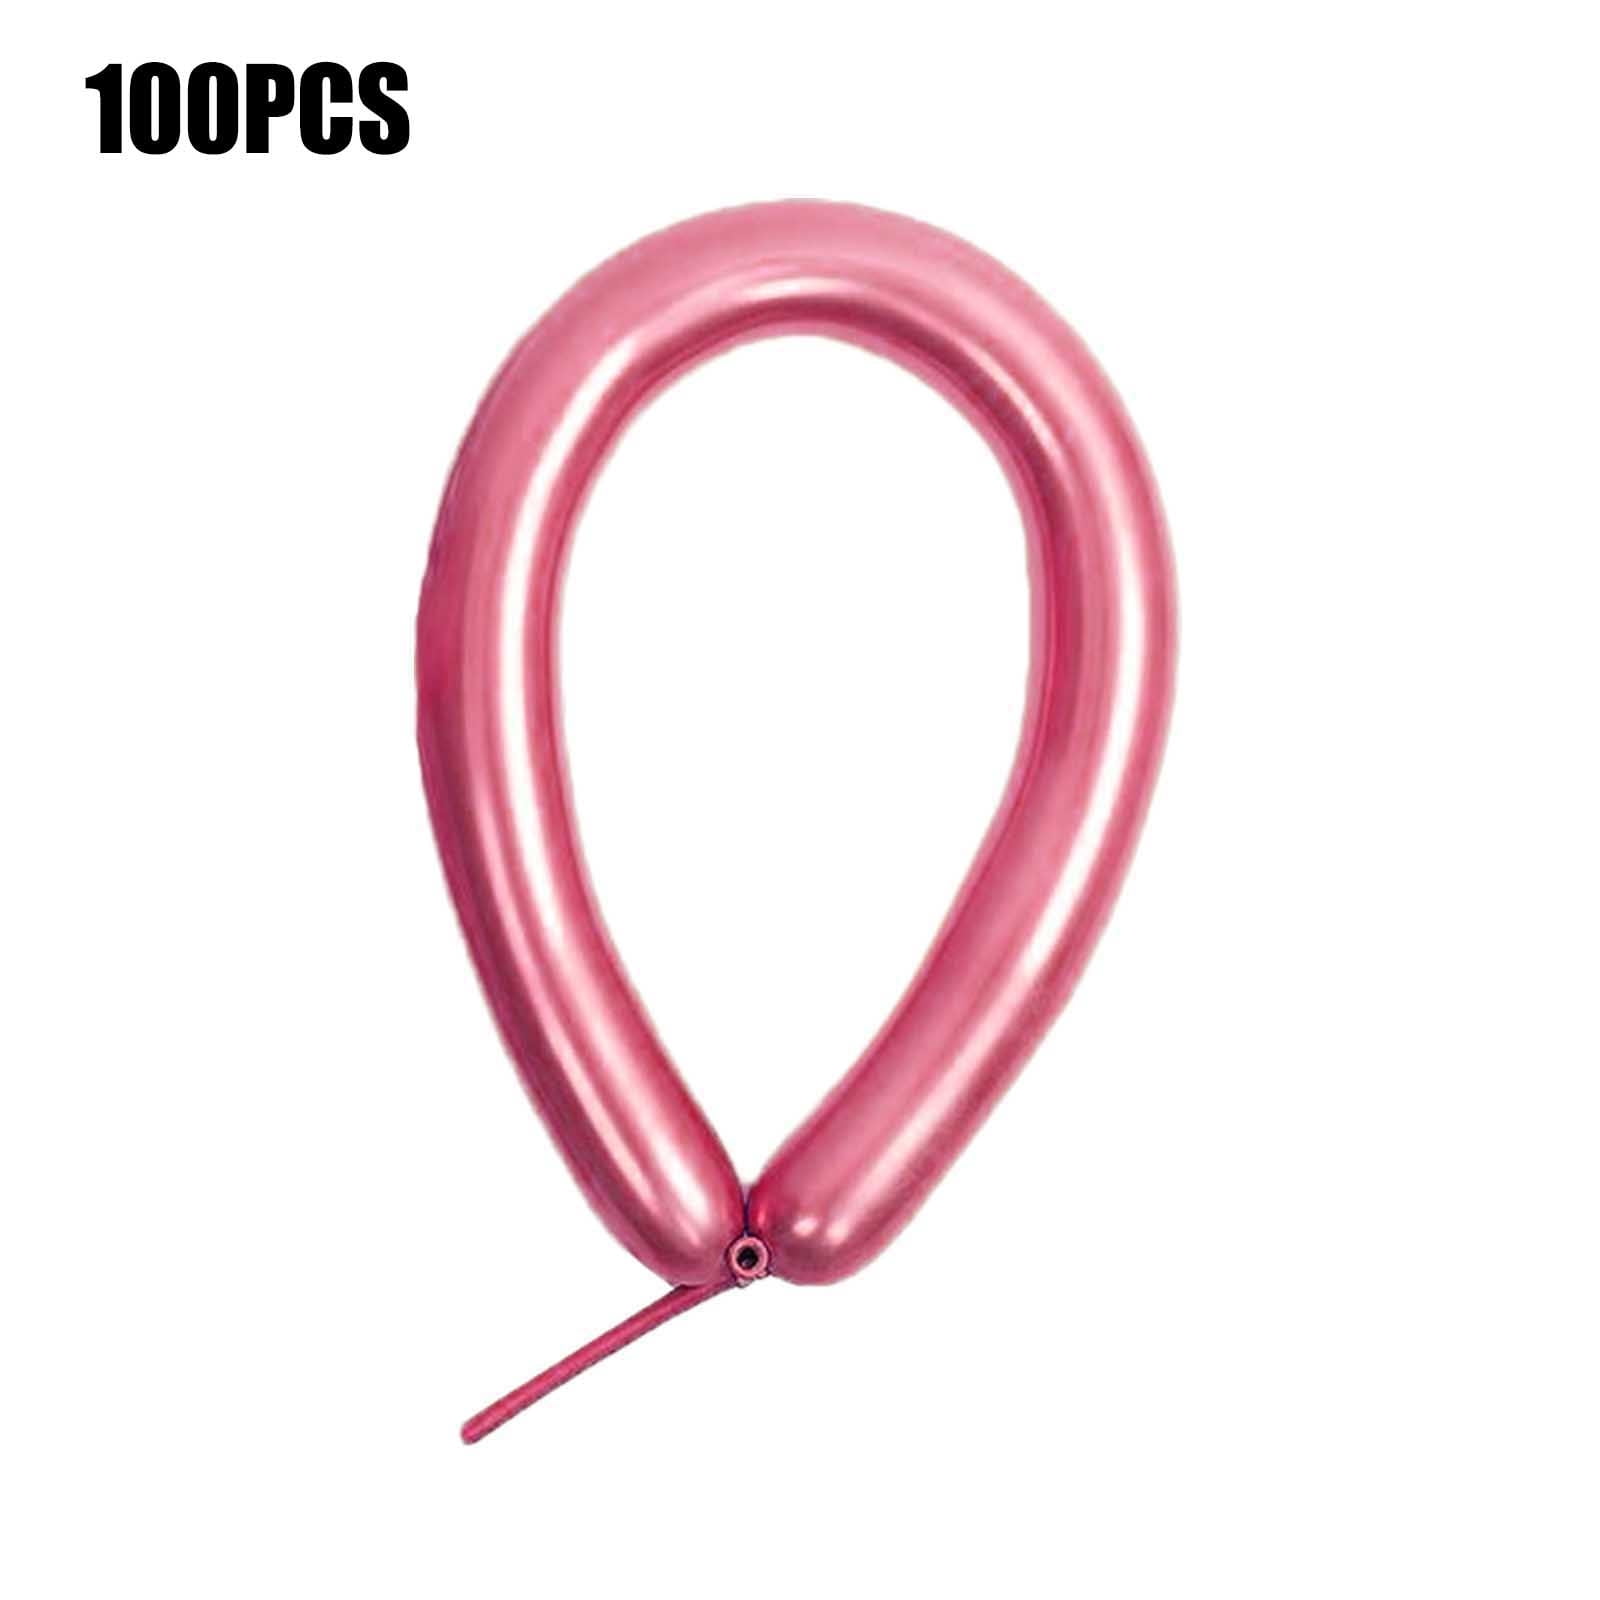 HSMQHJWE 100 Pcs Metallic 260 Long Balloons Kit with Pump Shiny Latex  Twisting Balloons for Balloon Animals Magic Balloons for Birthdays Wedding  Party Decorations Multicolor 